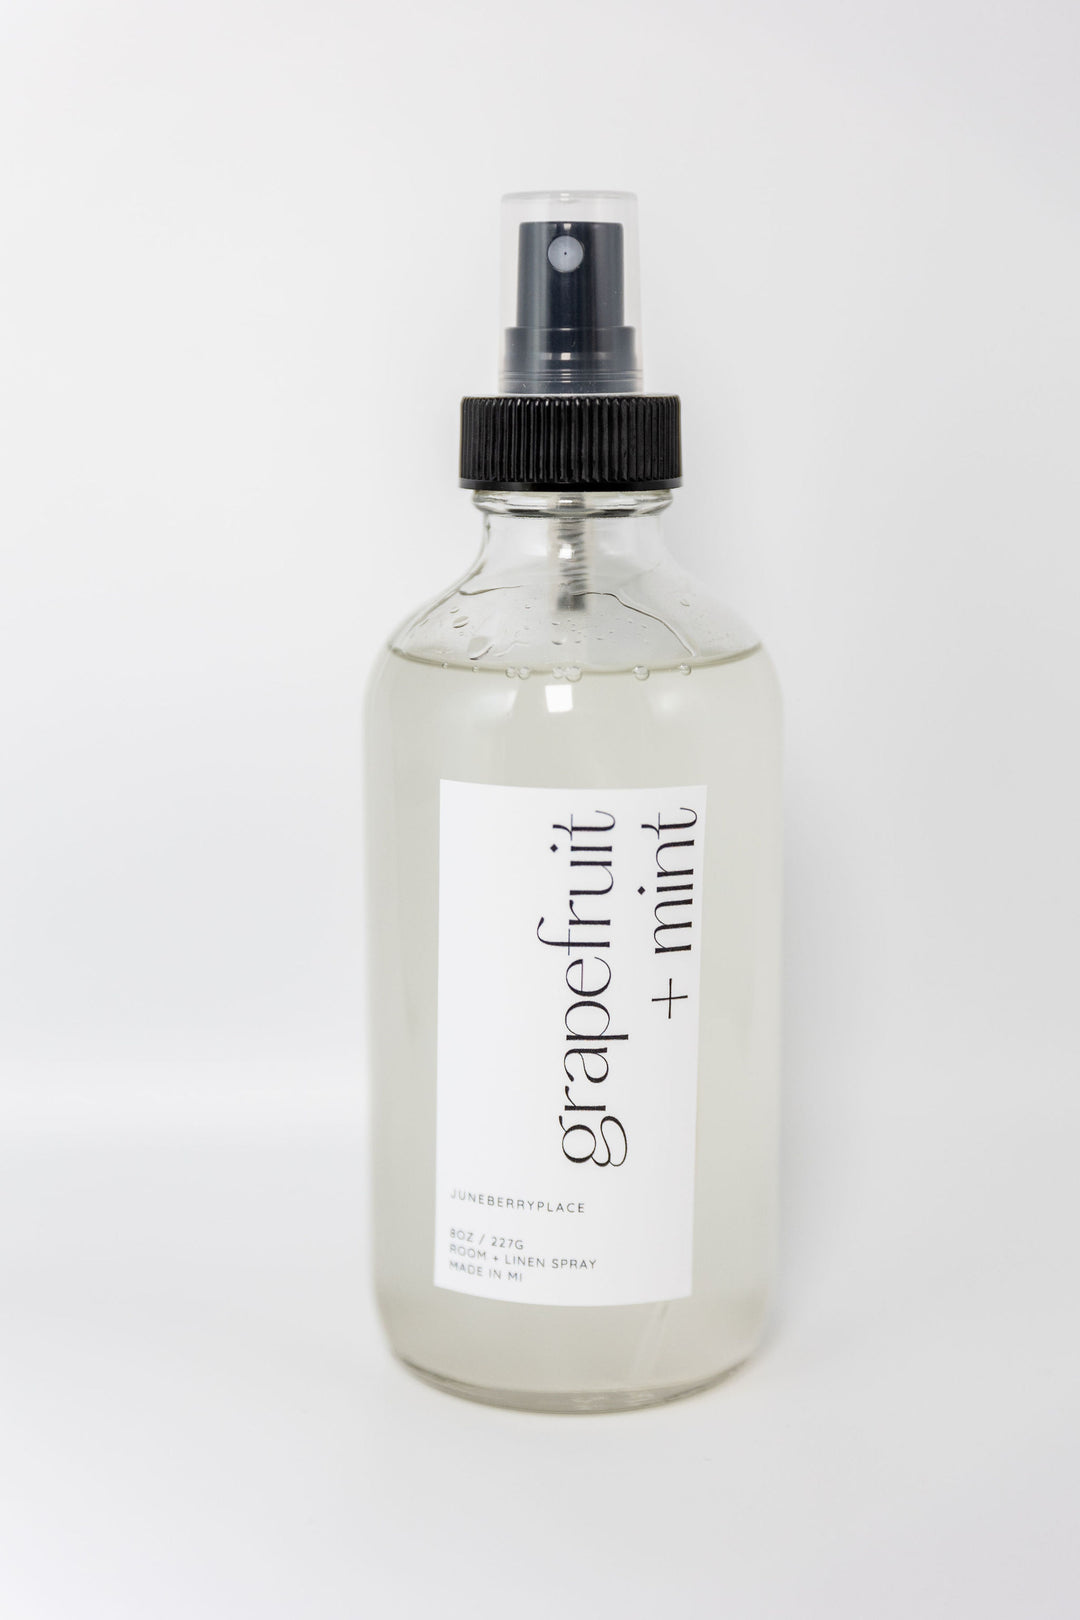 Grapefruit and Mint Room and Linen Spray - Spring Collection in a glass bottle by juneberryplace home fragrances